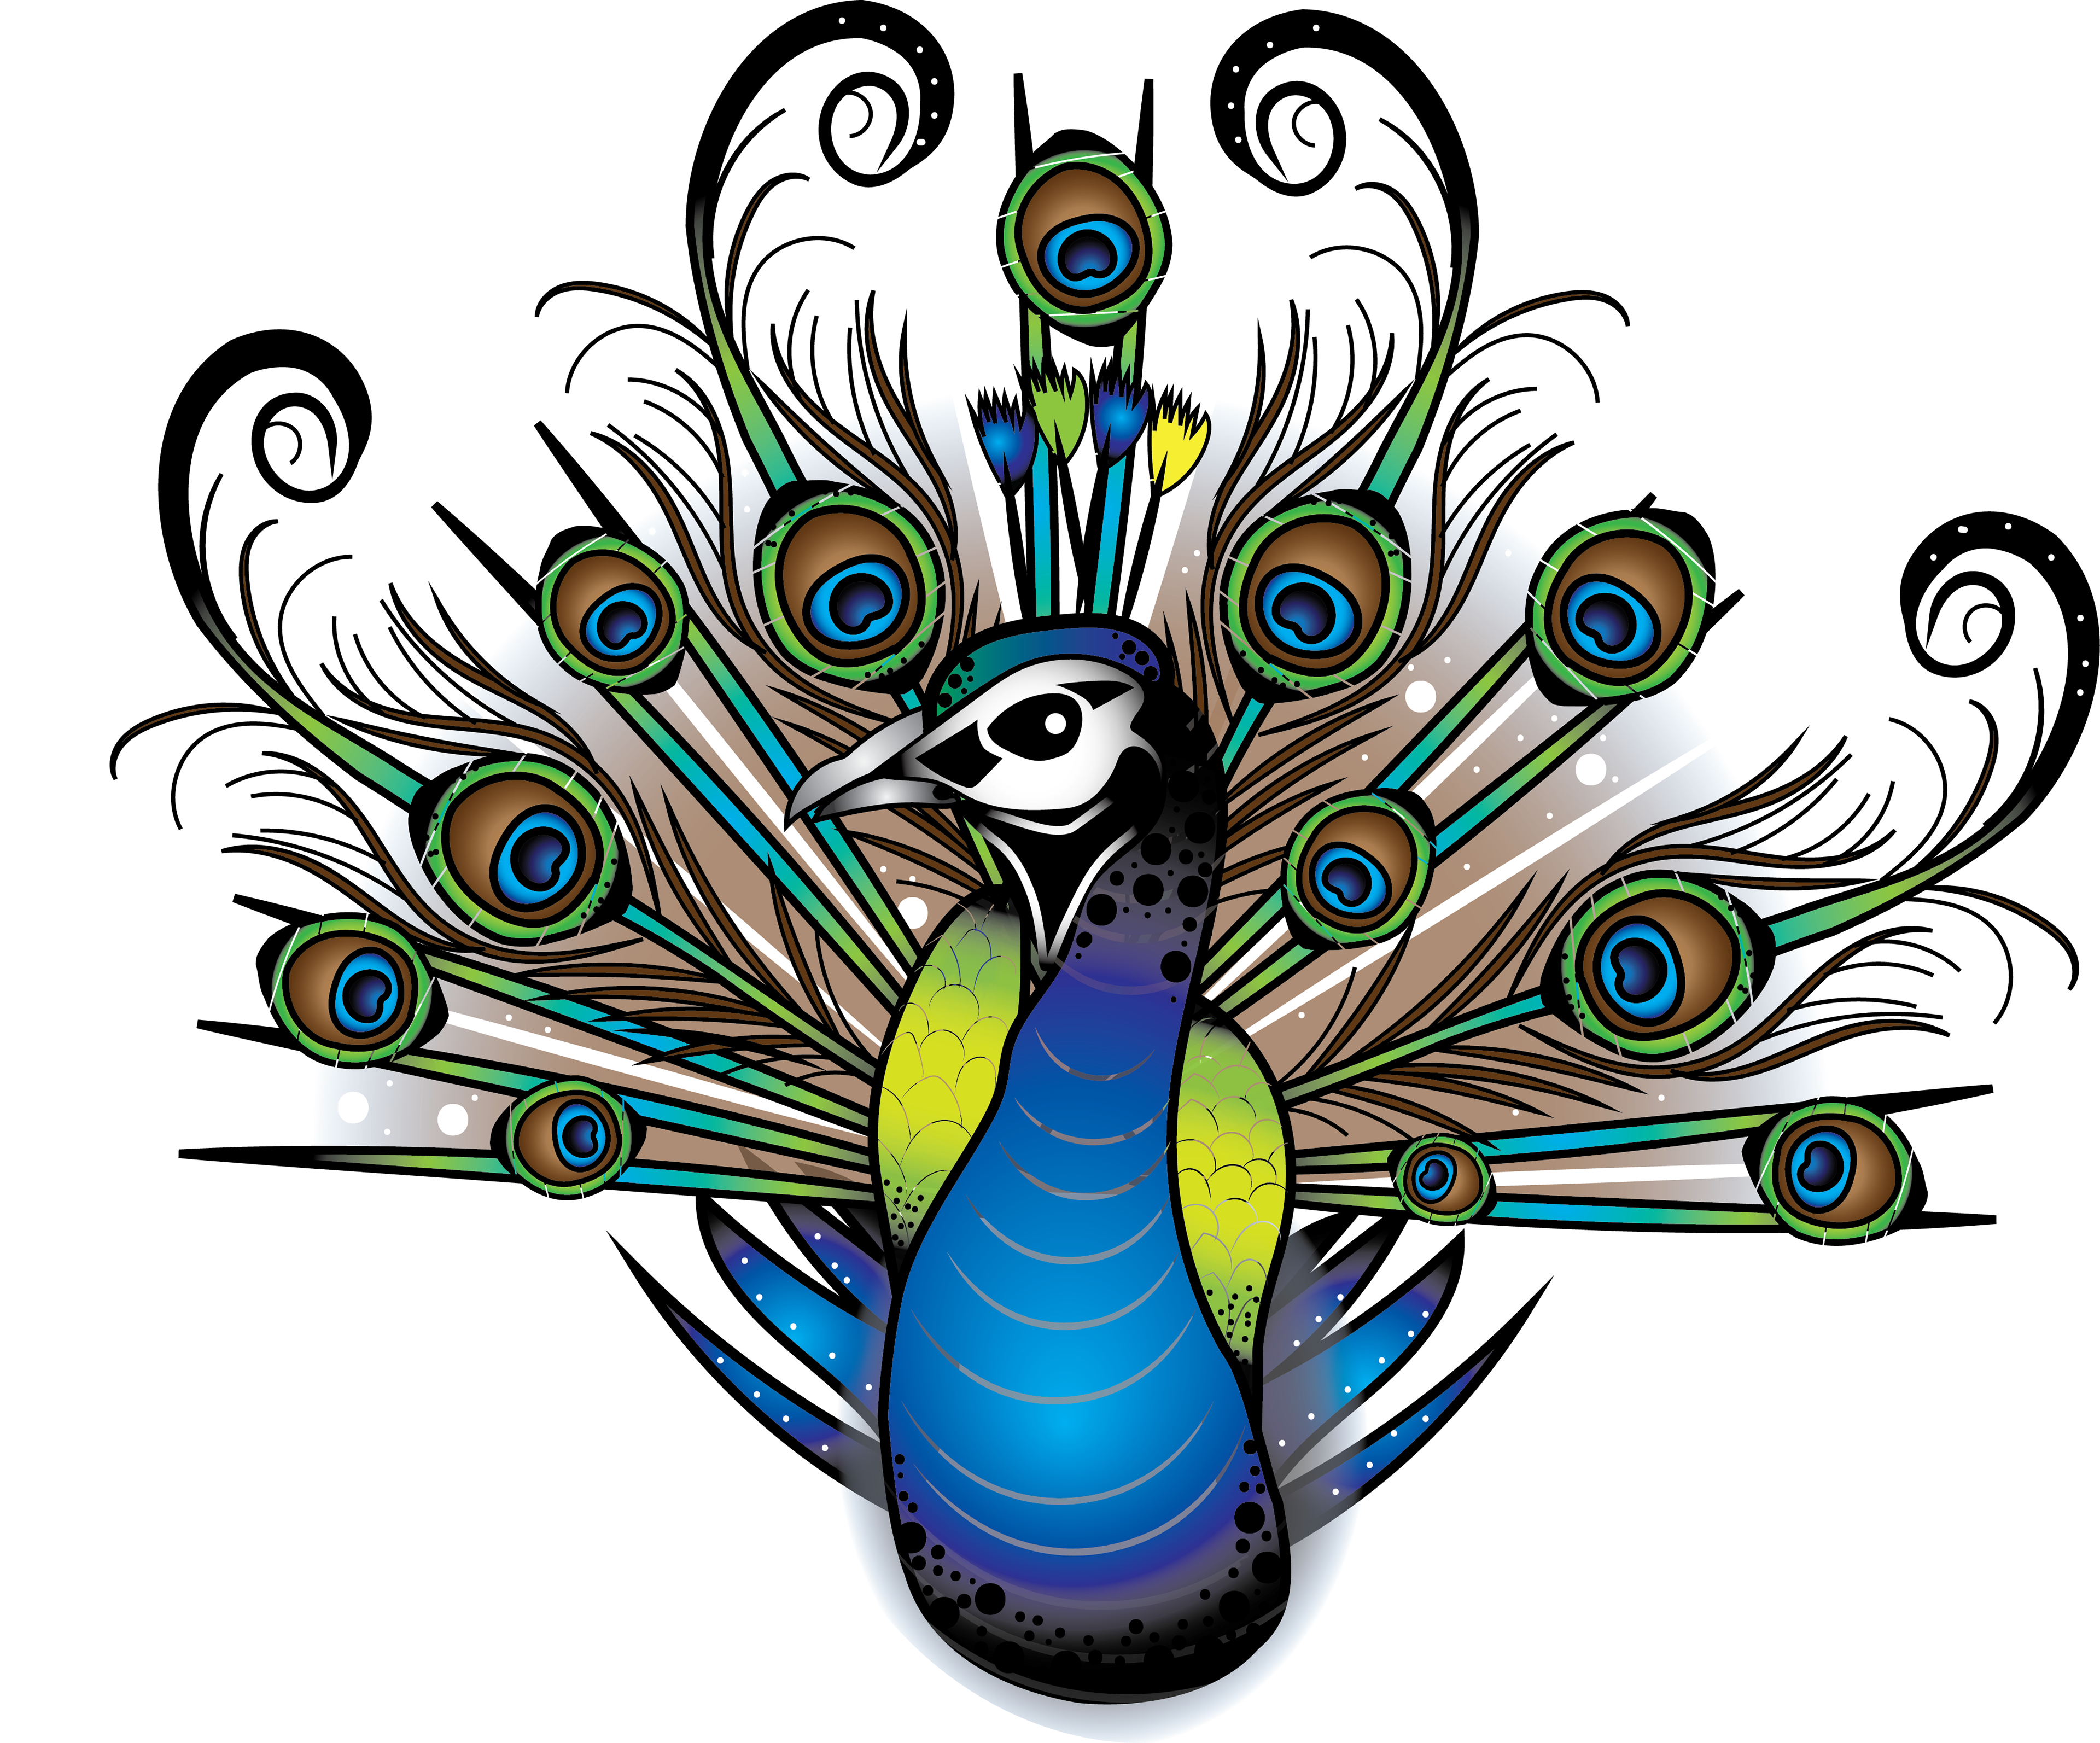 A Colorful Peacock With Many Feathers